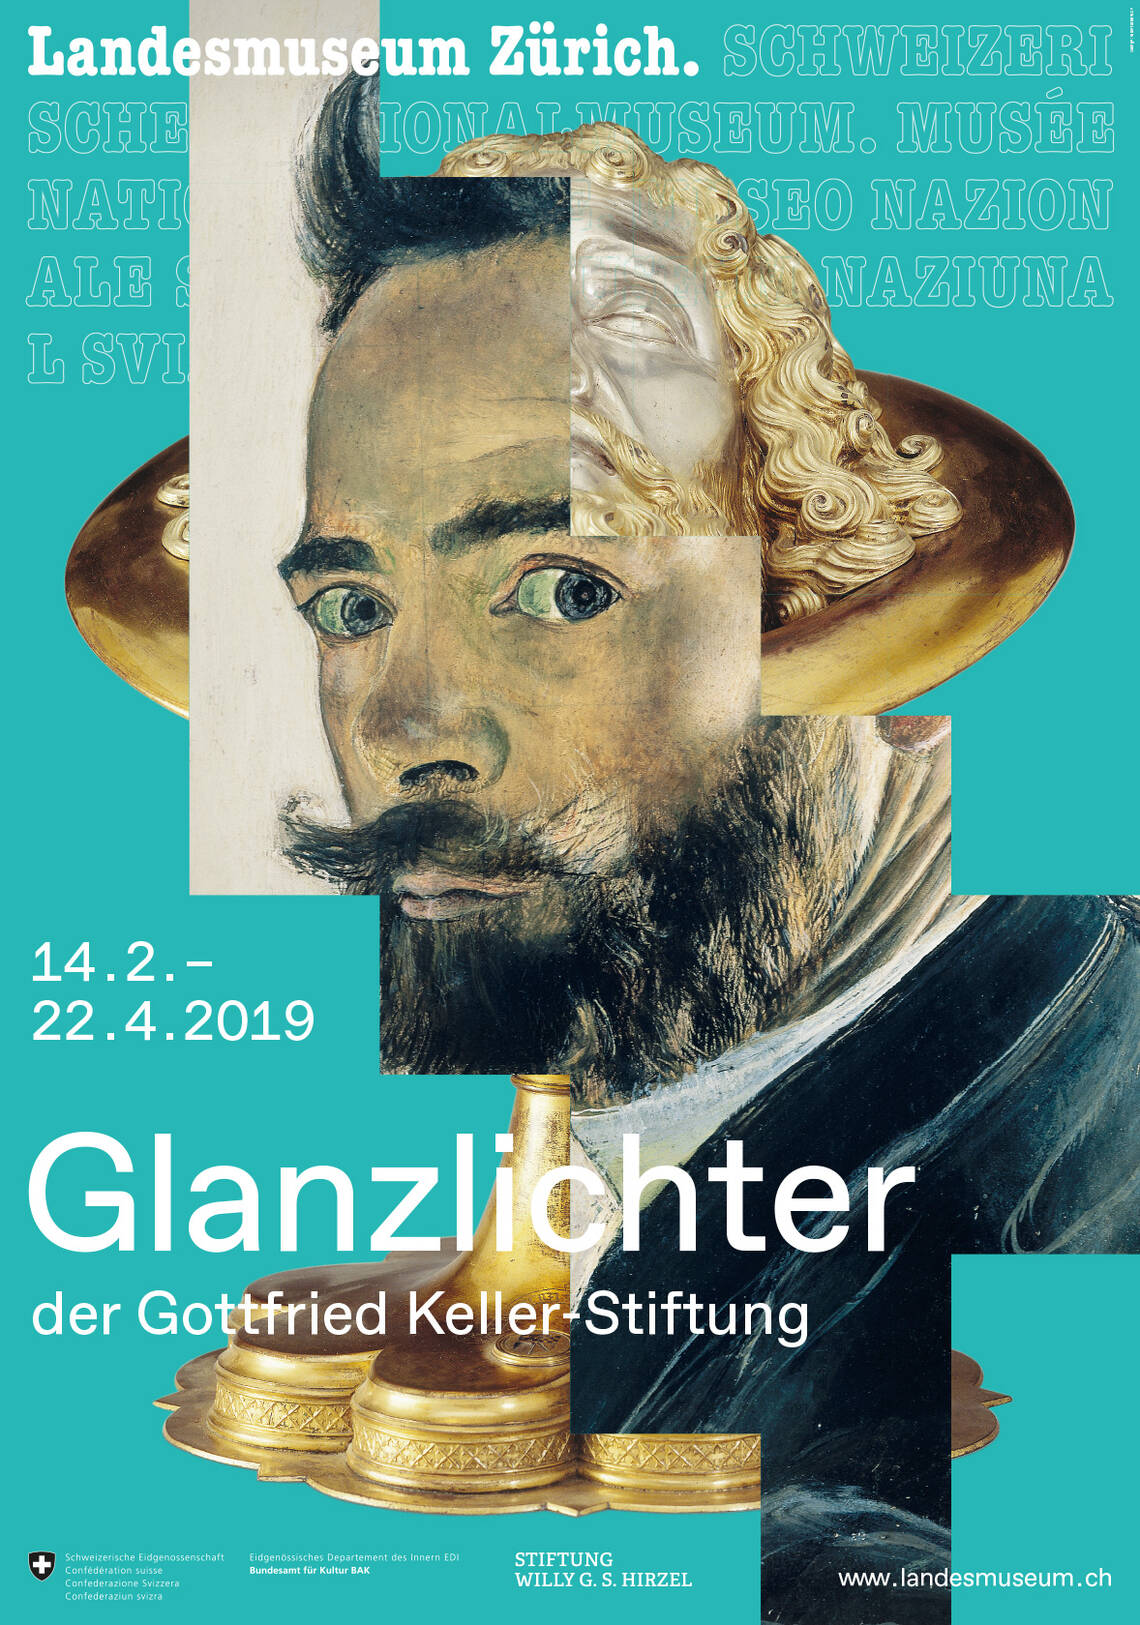 Poster of the "Highlights of the Gottfried Keller Foundation" exhibition